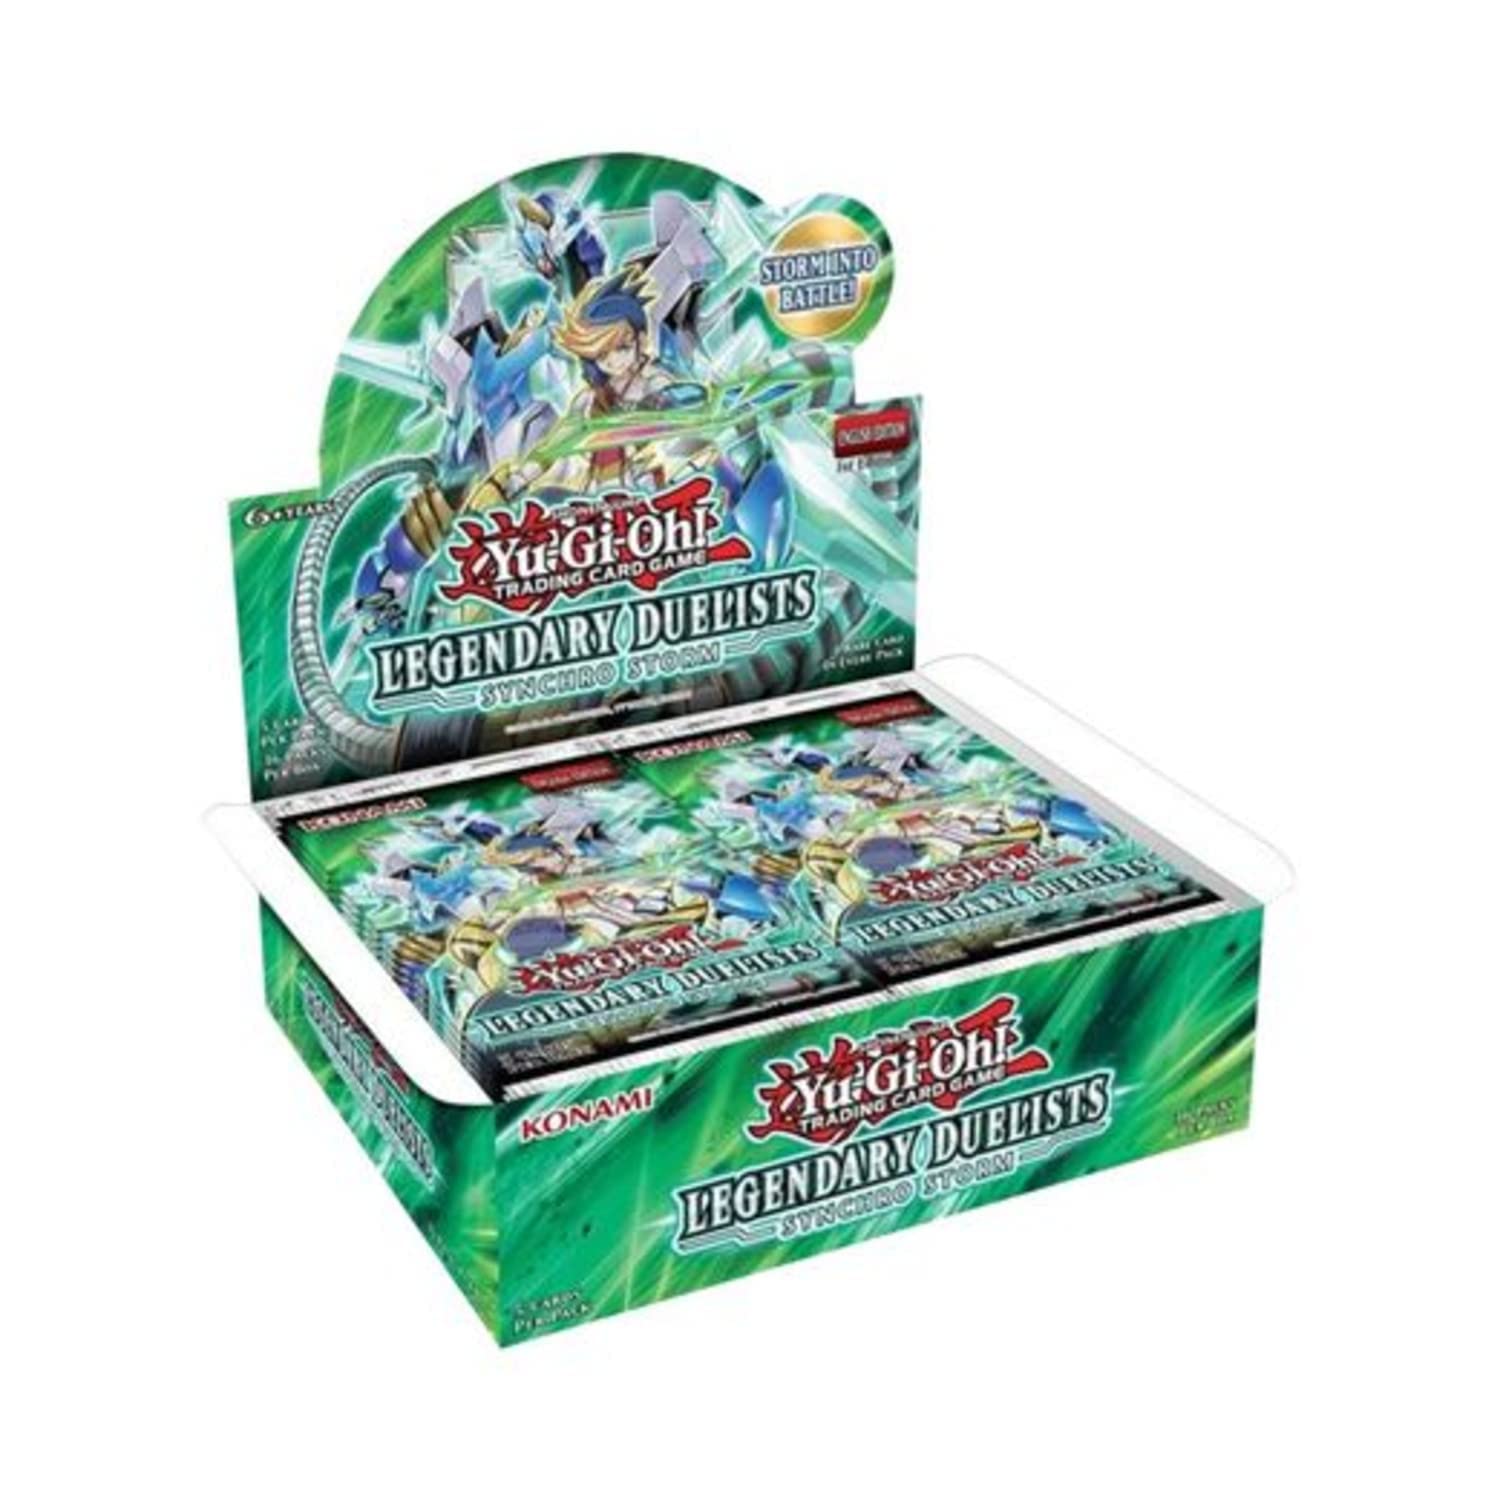 Yugioh Legendary Duelists Synchro Storm Booster Box - 36 Packs